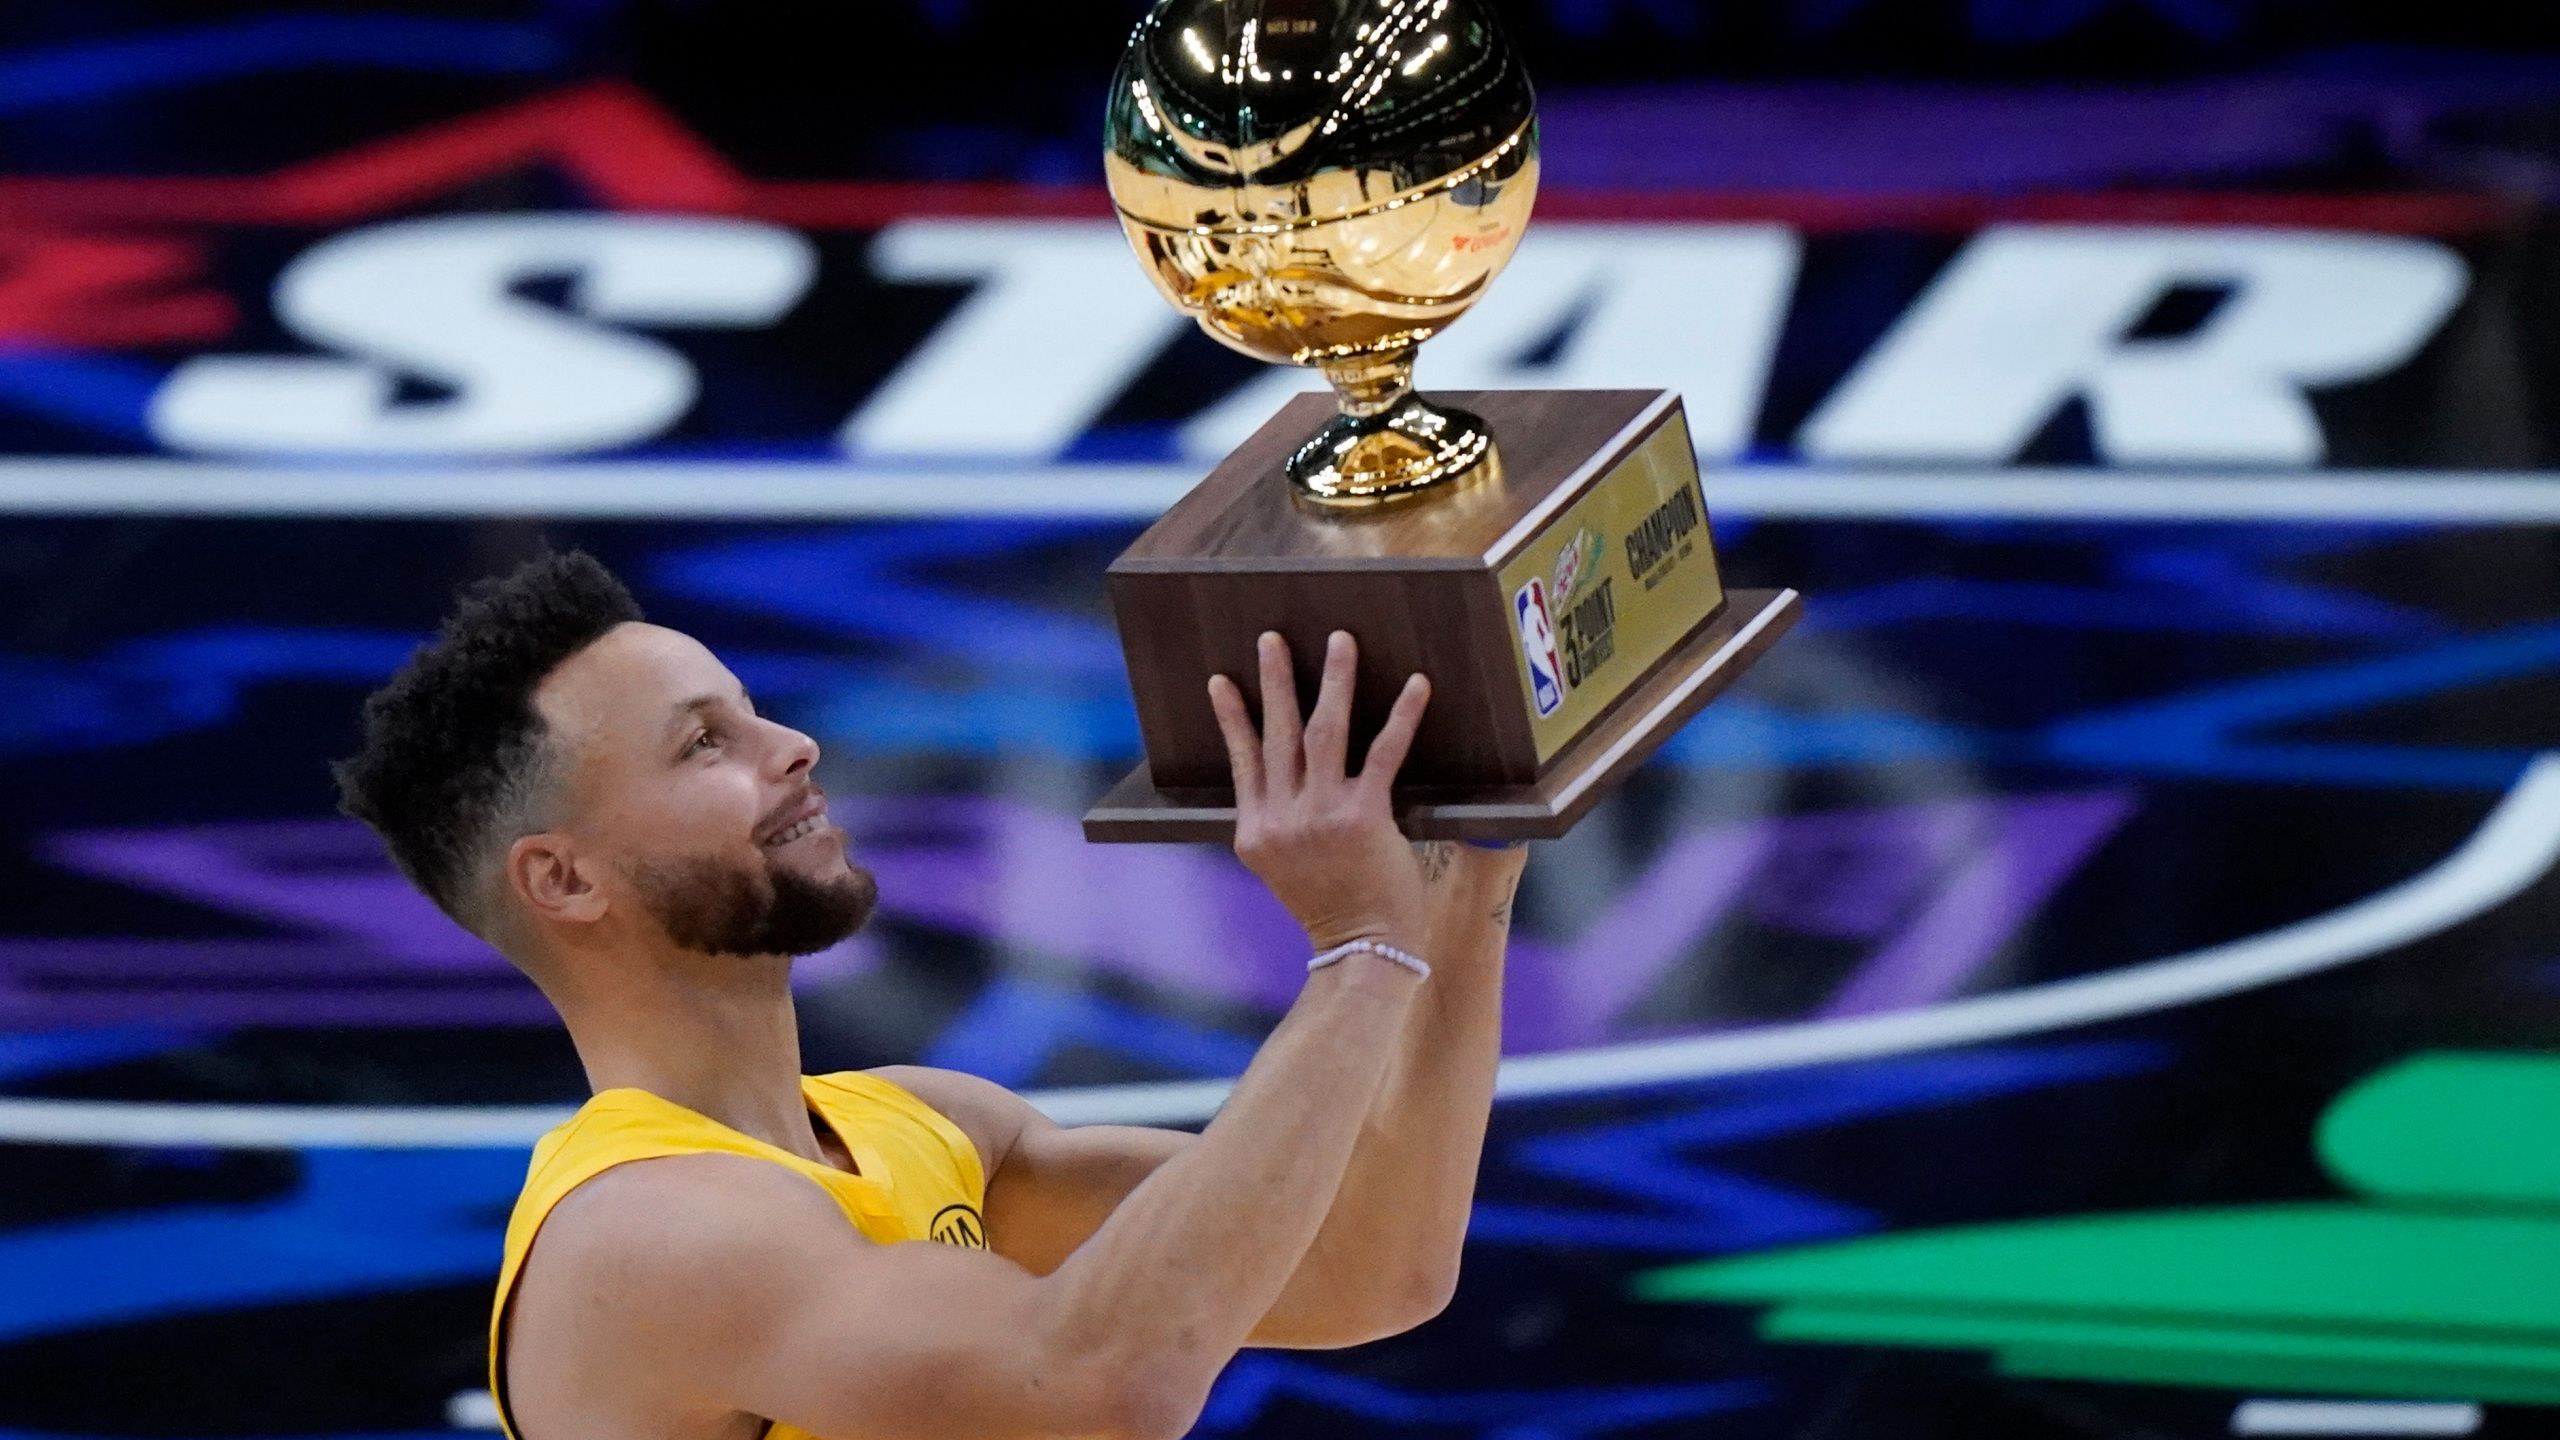 All Star Weekend: Steph Curry Dedicates 3 Point Contest Win To Klay Thompson